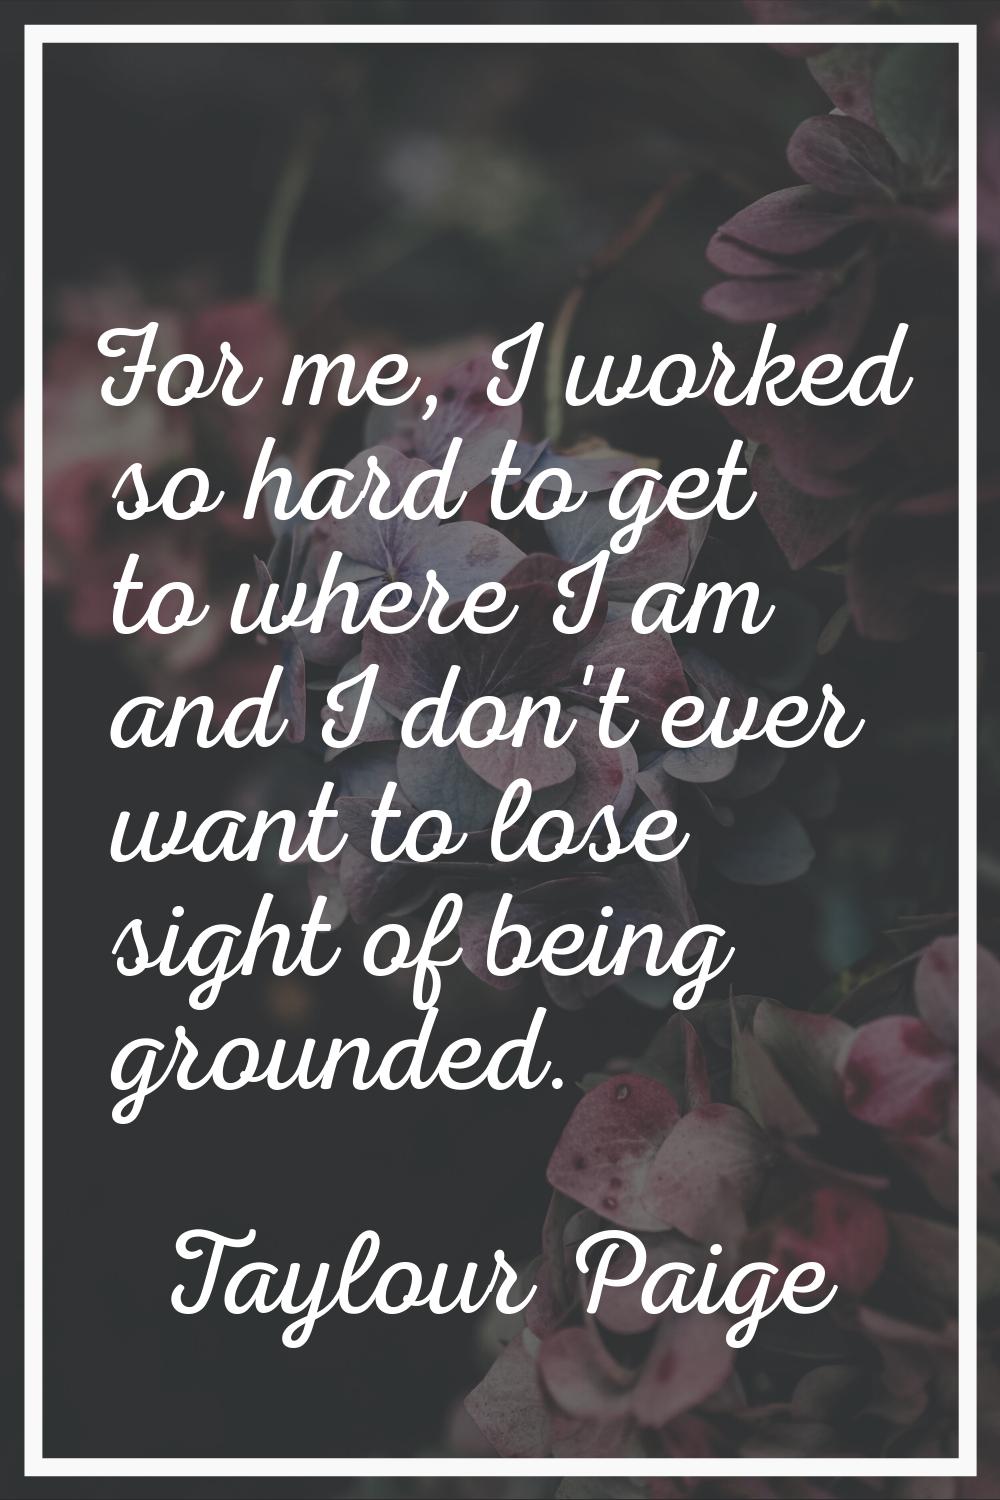 For me, I worked so hard to get to where I am and I don't ever want to lose sight of being grounded